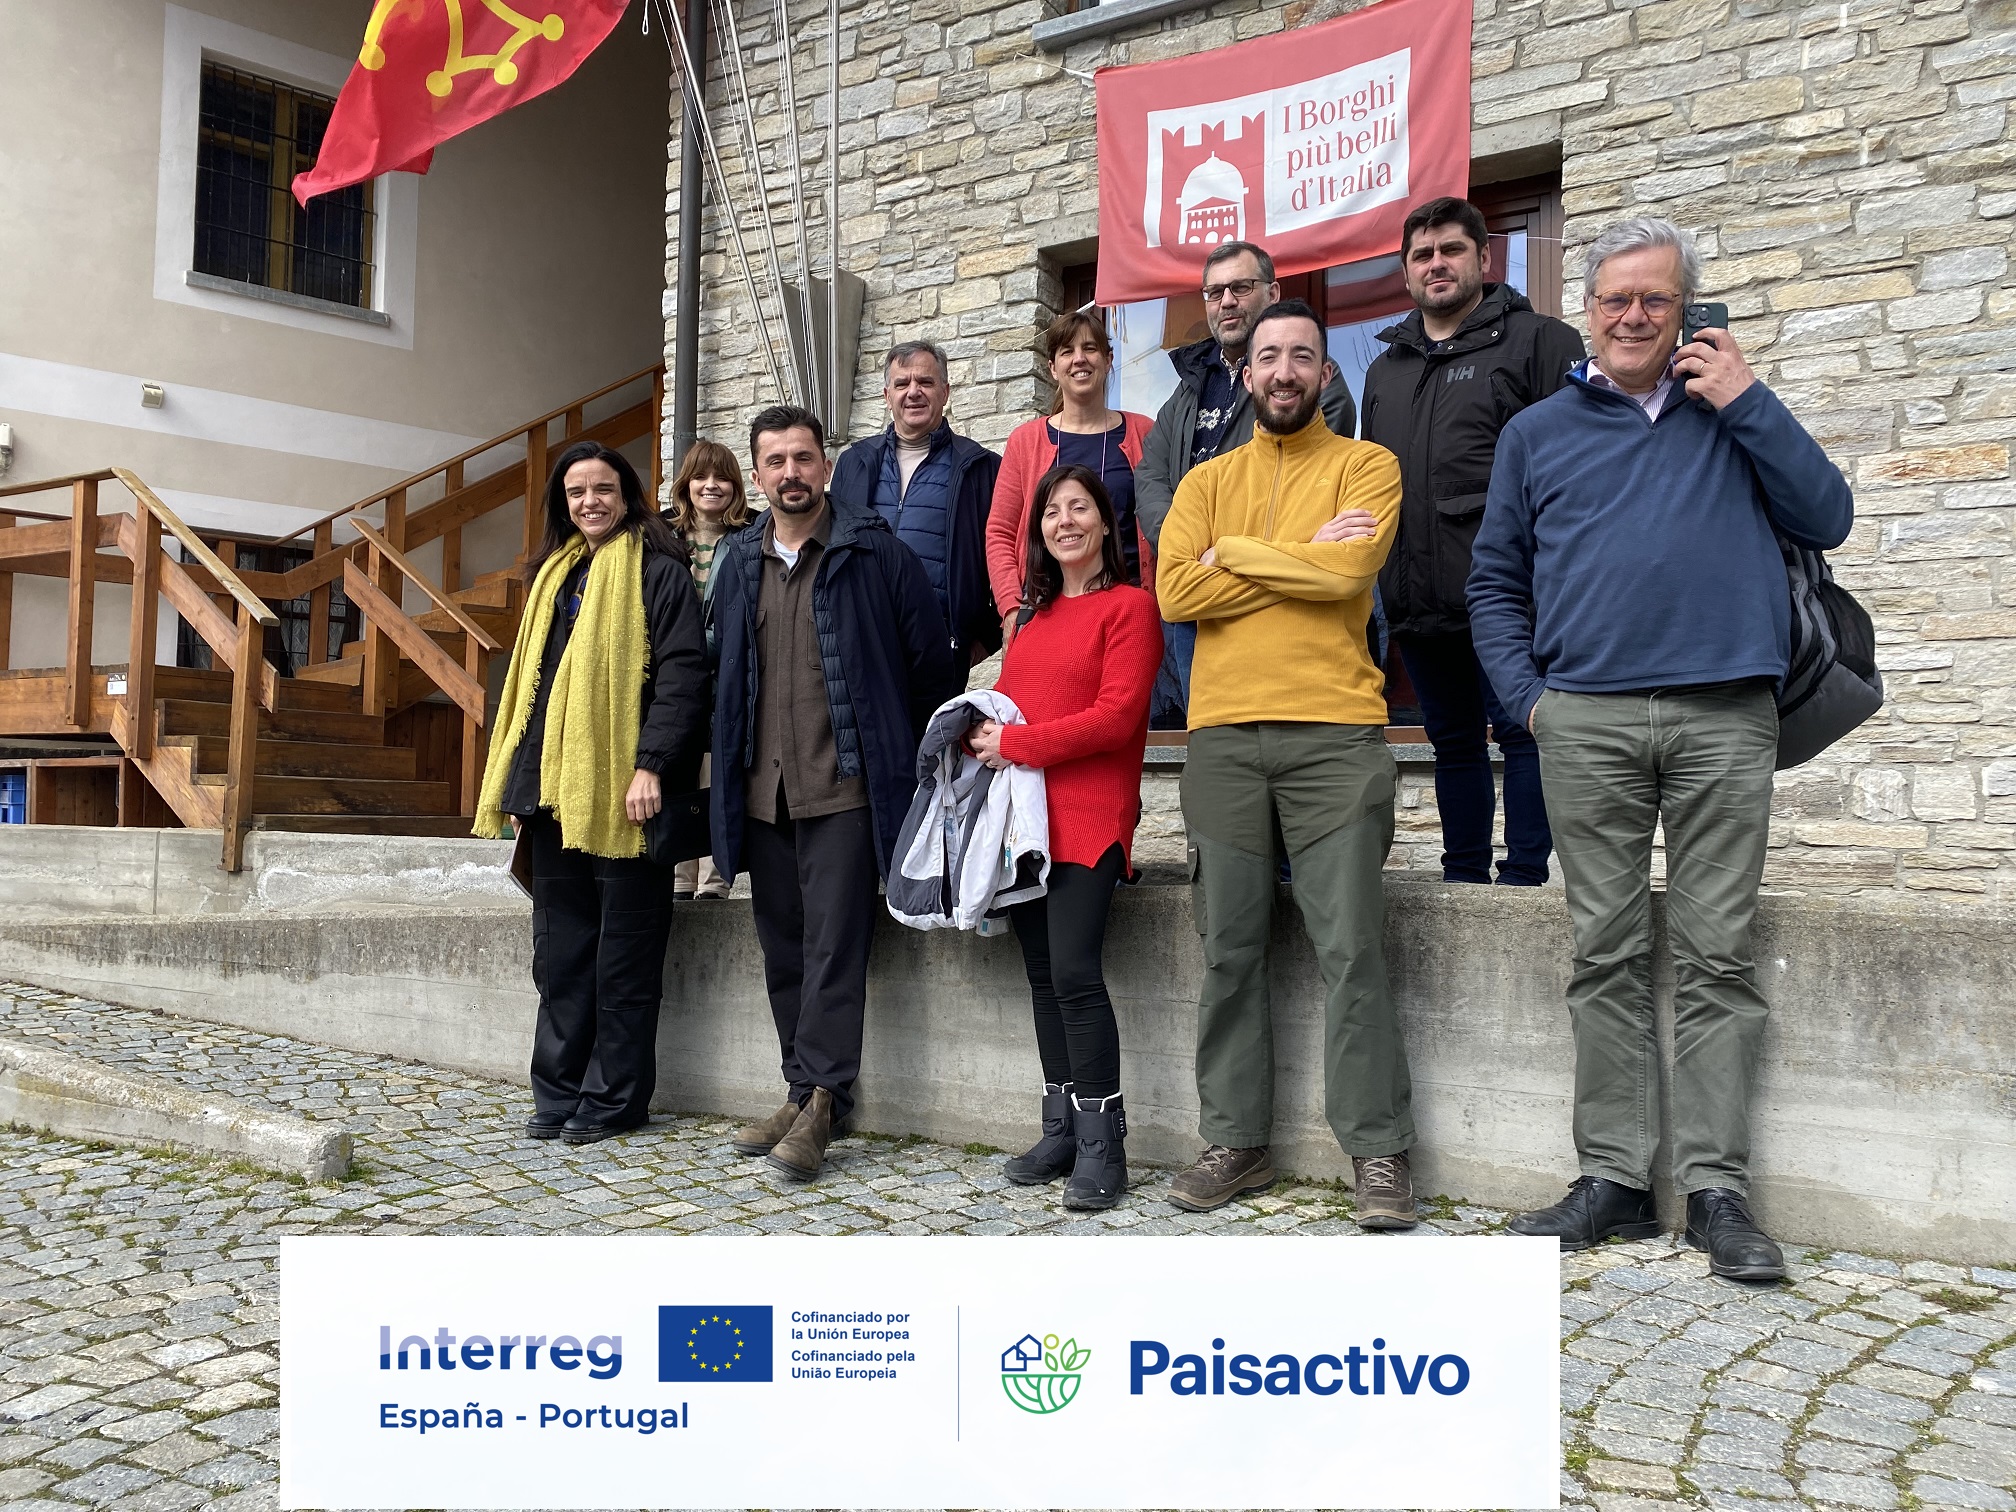 Community projects as a driver of the rural space transformation: architectural and housing development in Ostana (Italy)